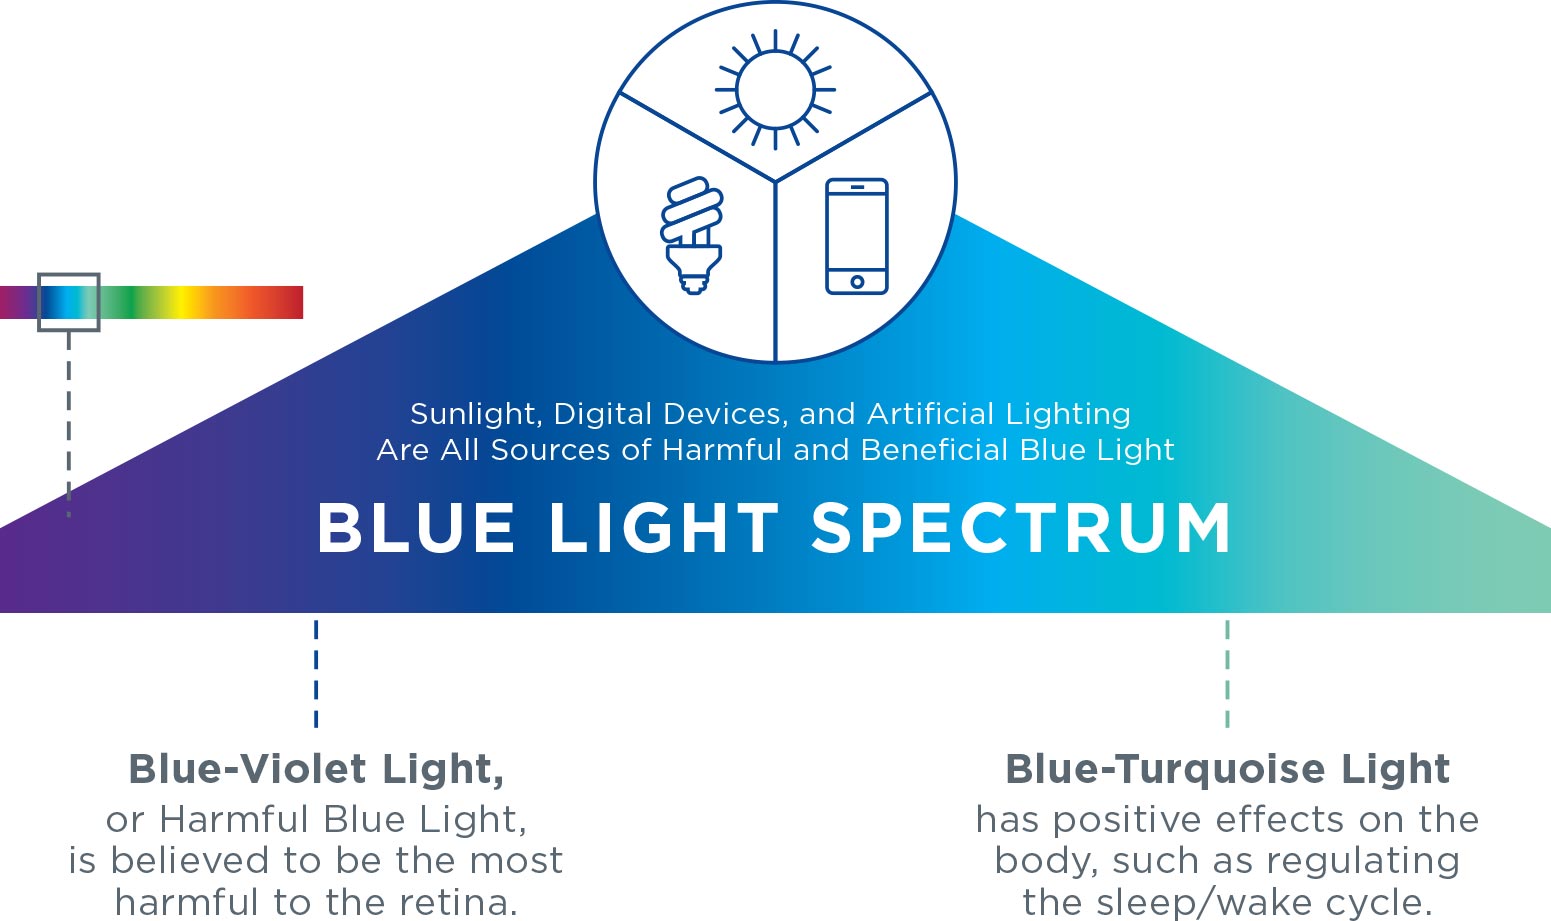 BLUE LIGHT SPECTRUM. Blue-Violet Light, or Harmful Blue Light, is believed to be the most harmful to the retina. Blue-Turquoise Light has positive effects on the body, such as regulating the sleep/wake cycle.